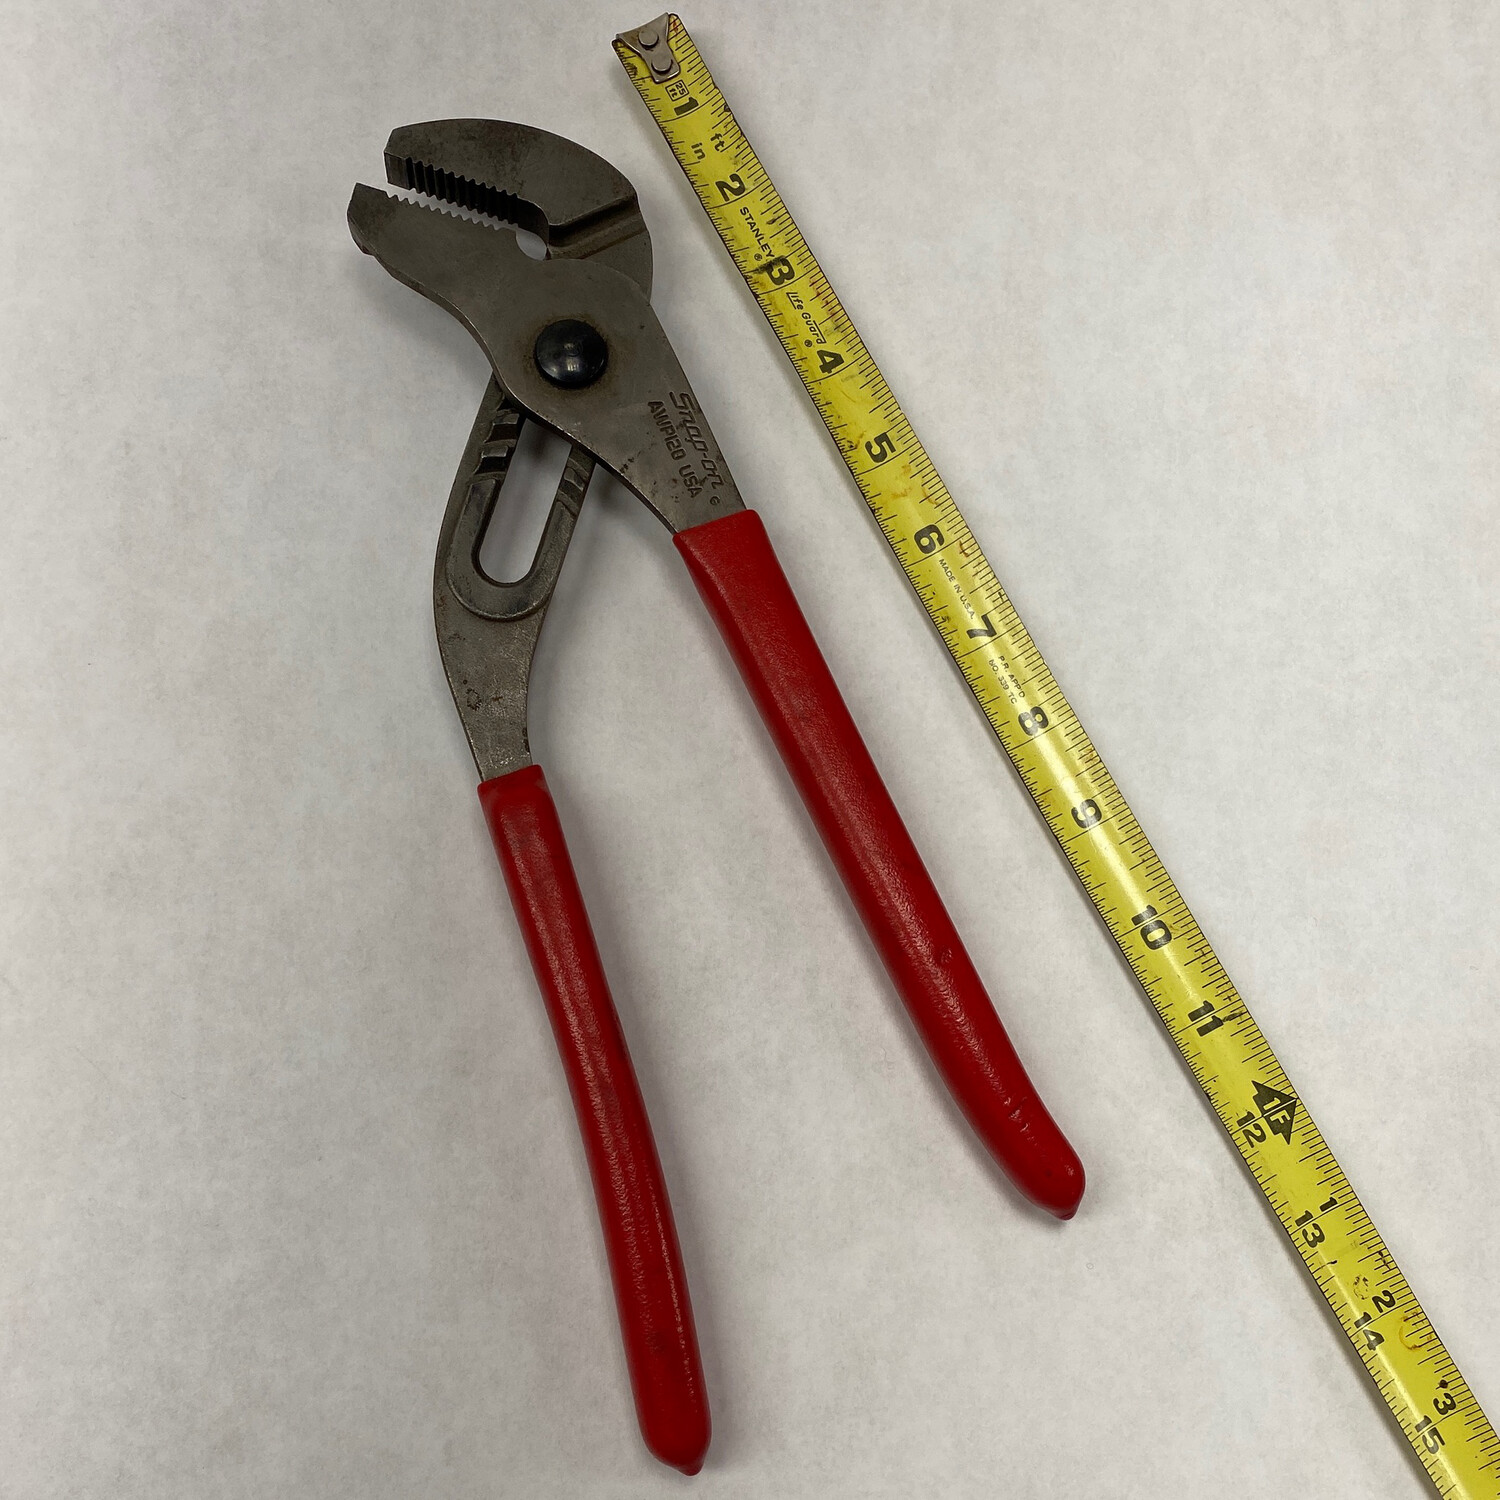 Snap On 12.5” Channel Lock Pliers, AWP120